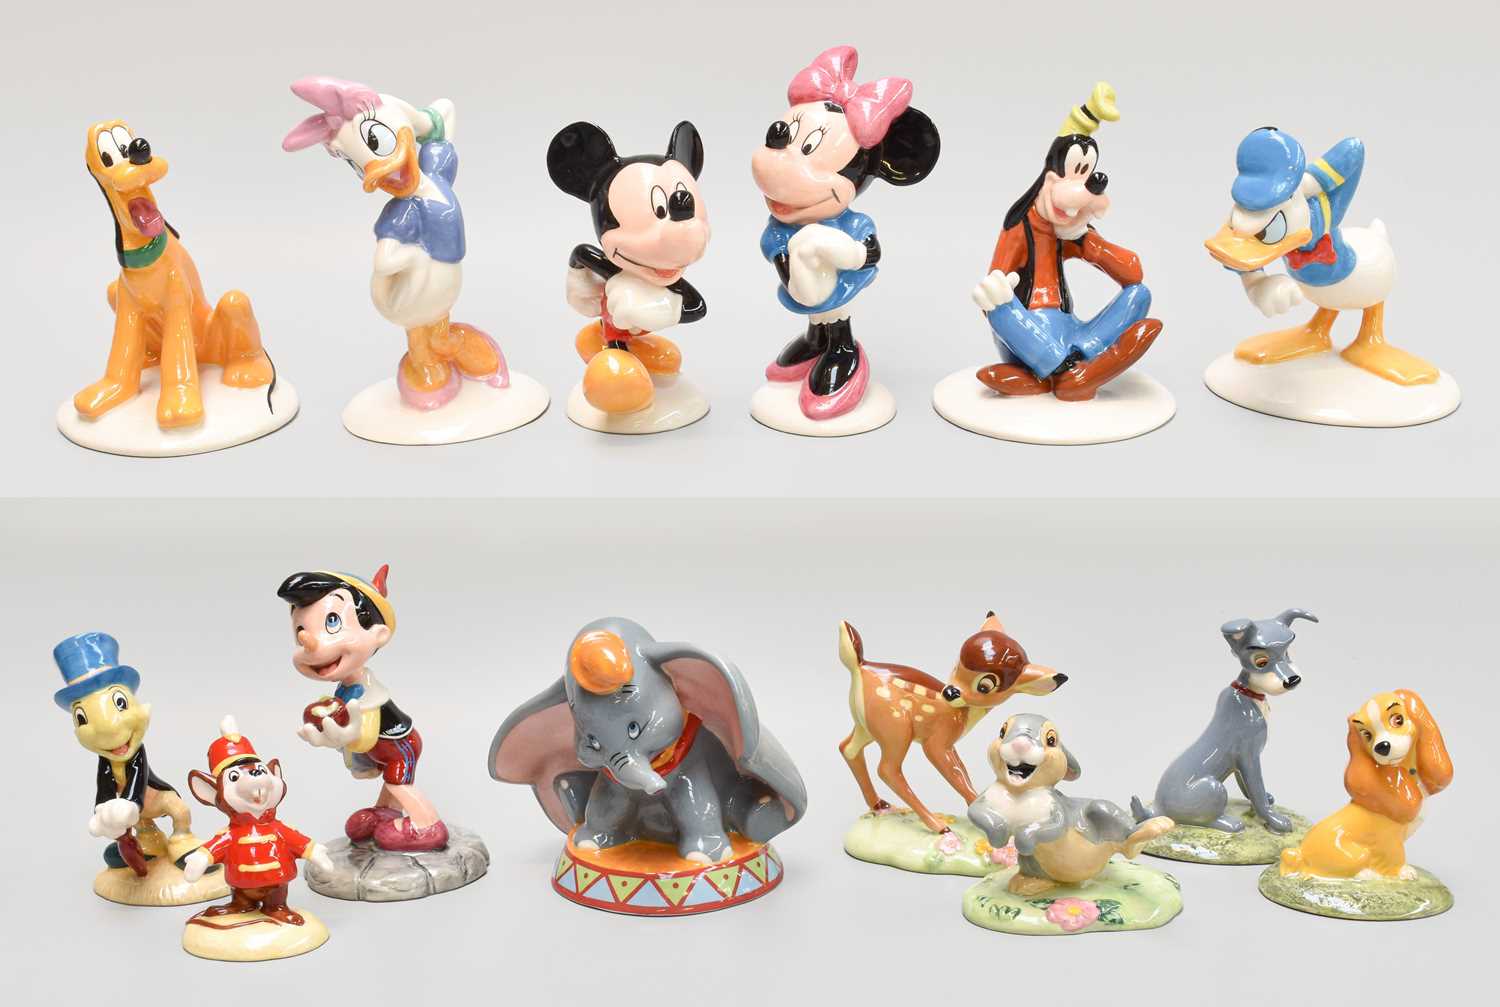 Royal Doulton Disney's "Film Classics Collection" Figures, including: 'Bambi', 'Dumbo' and '